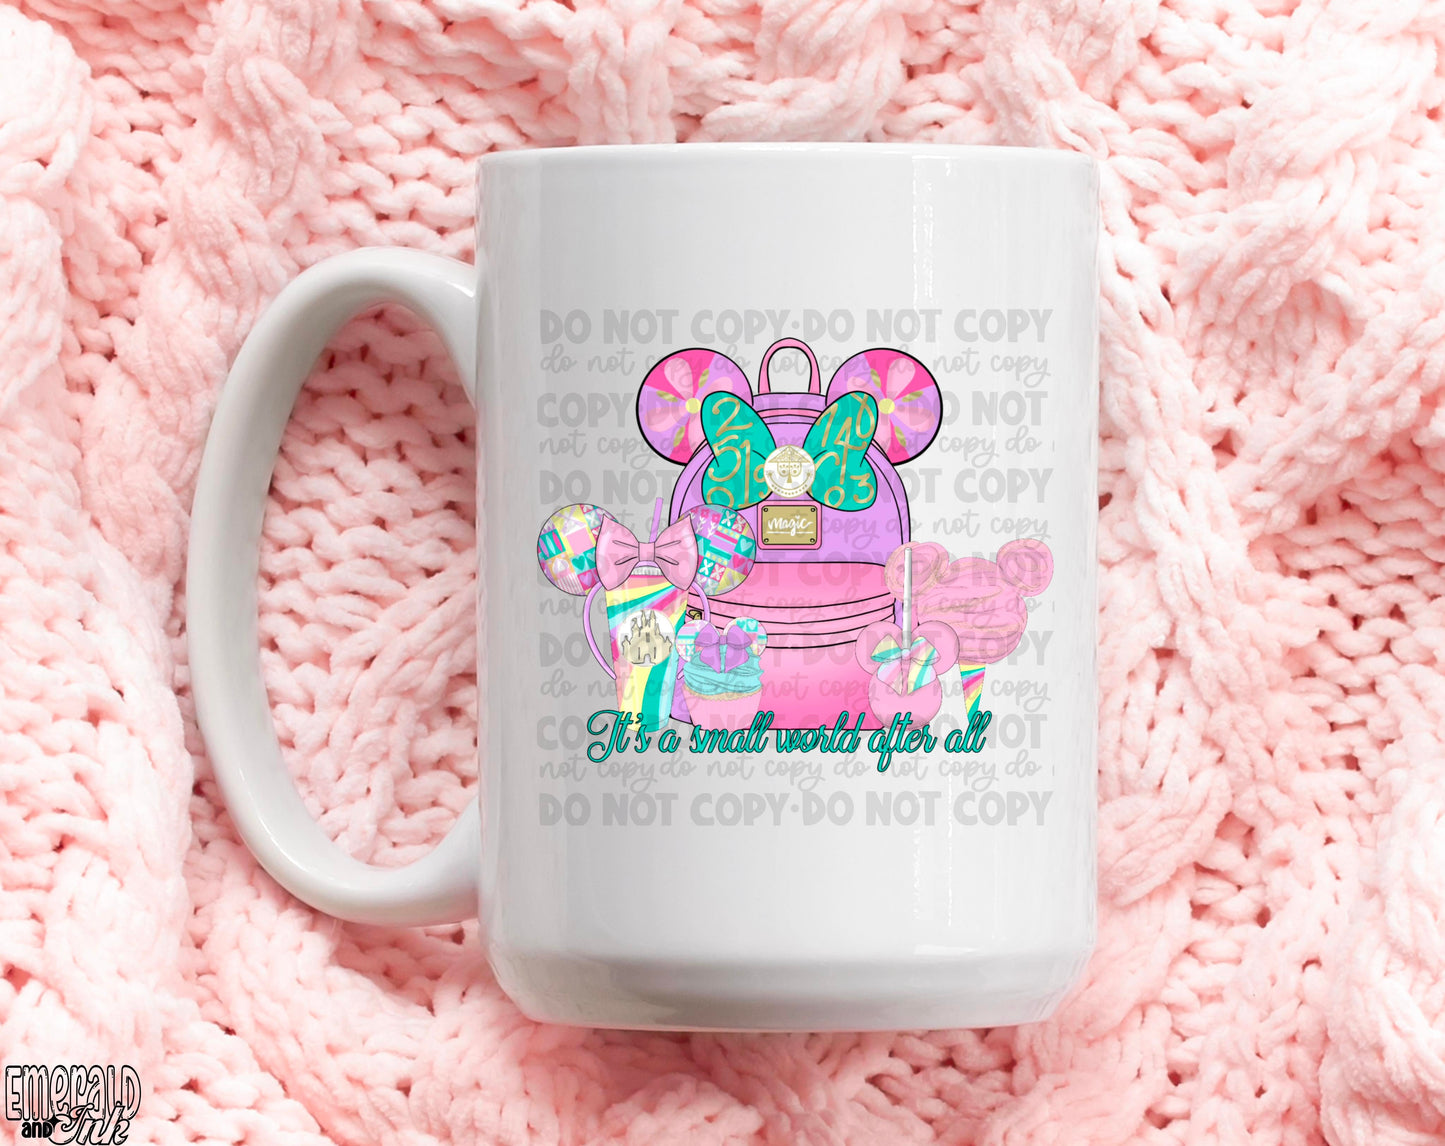 It's a small world afterall - UVDTF Mug/Cup Transfer